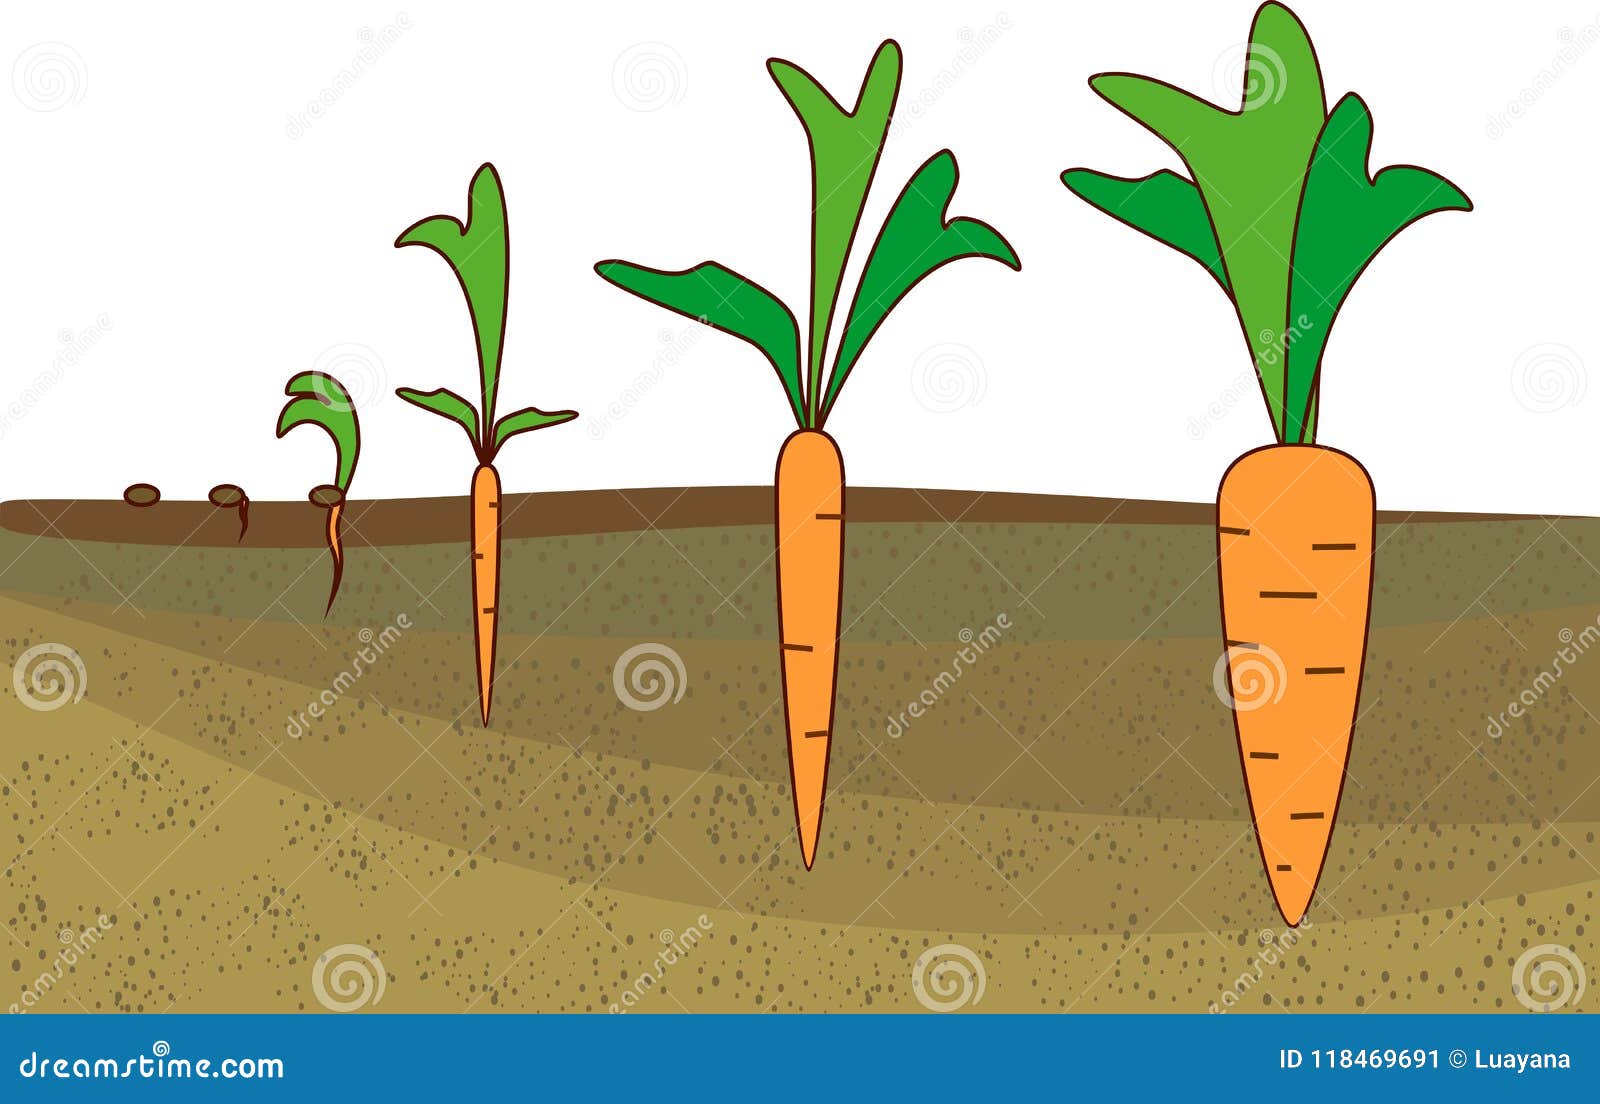 Carrot growth stages stock vector. Illustration of development - 118469691